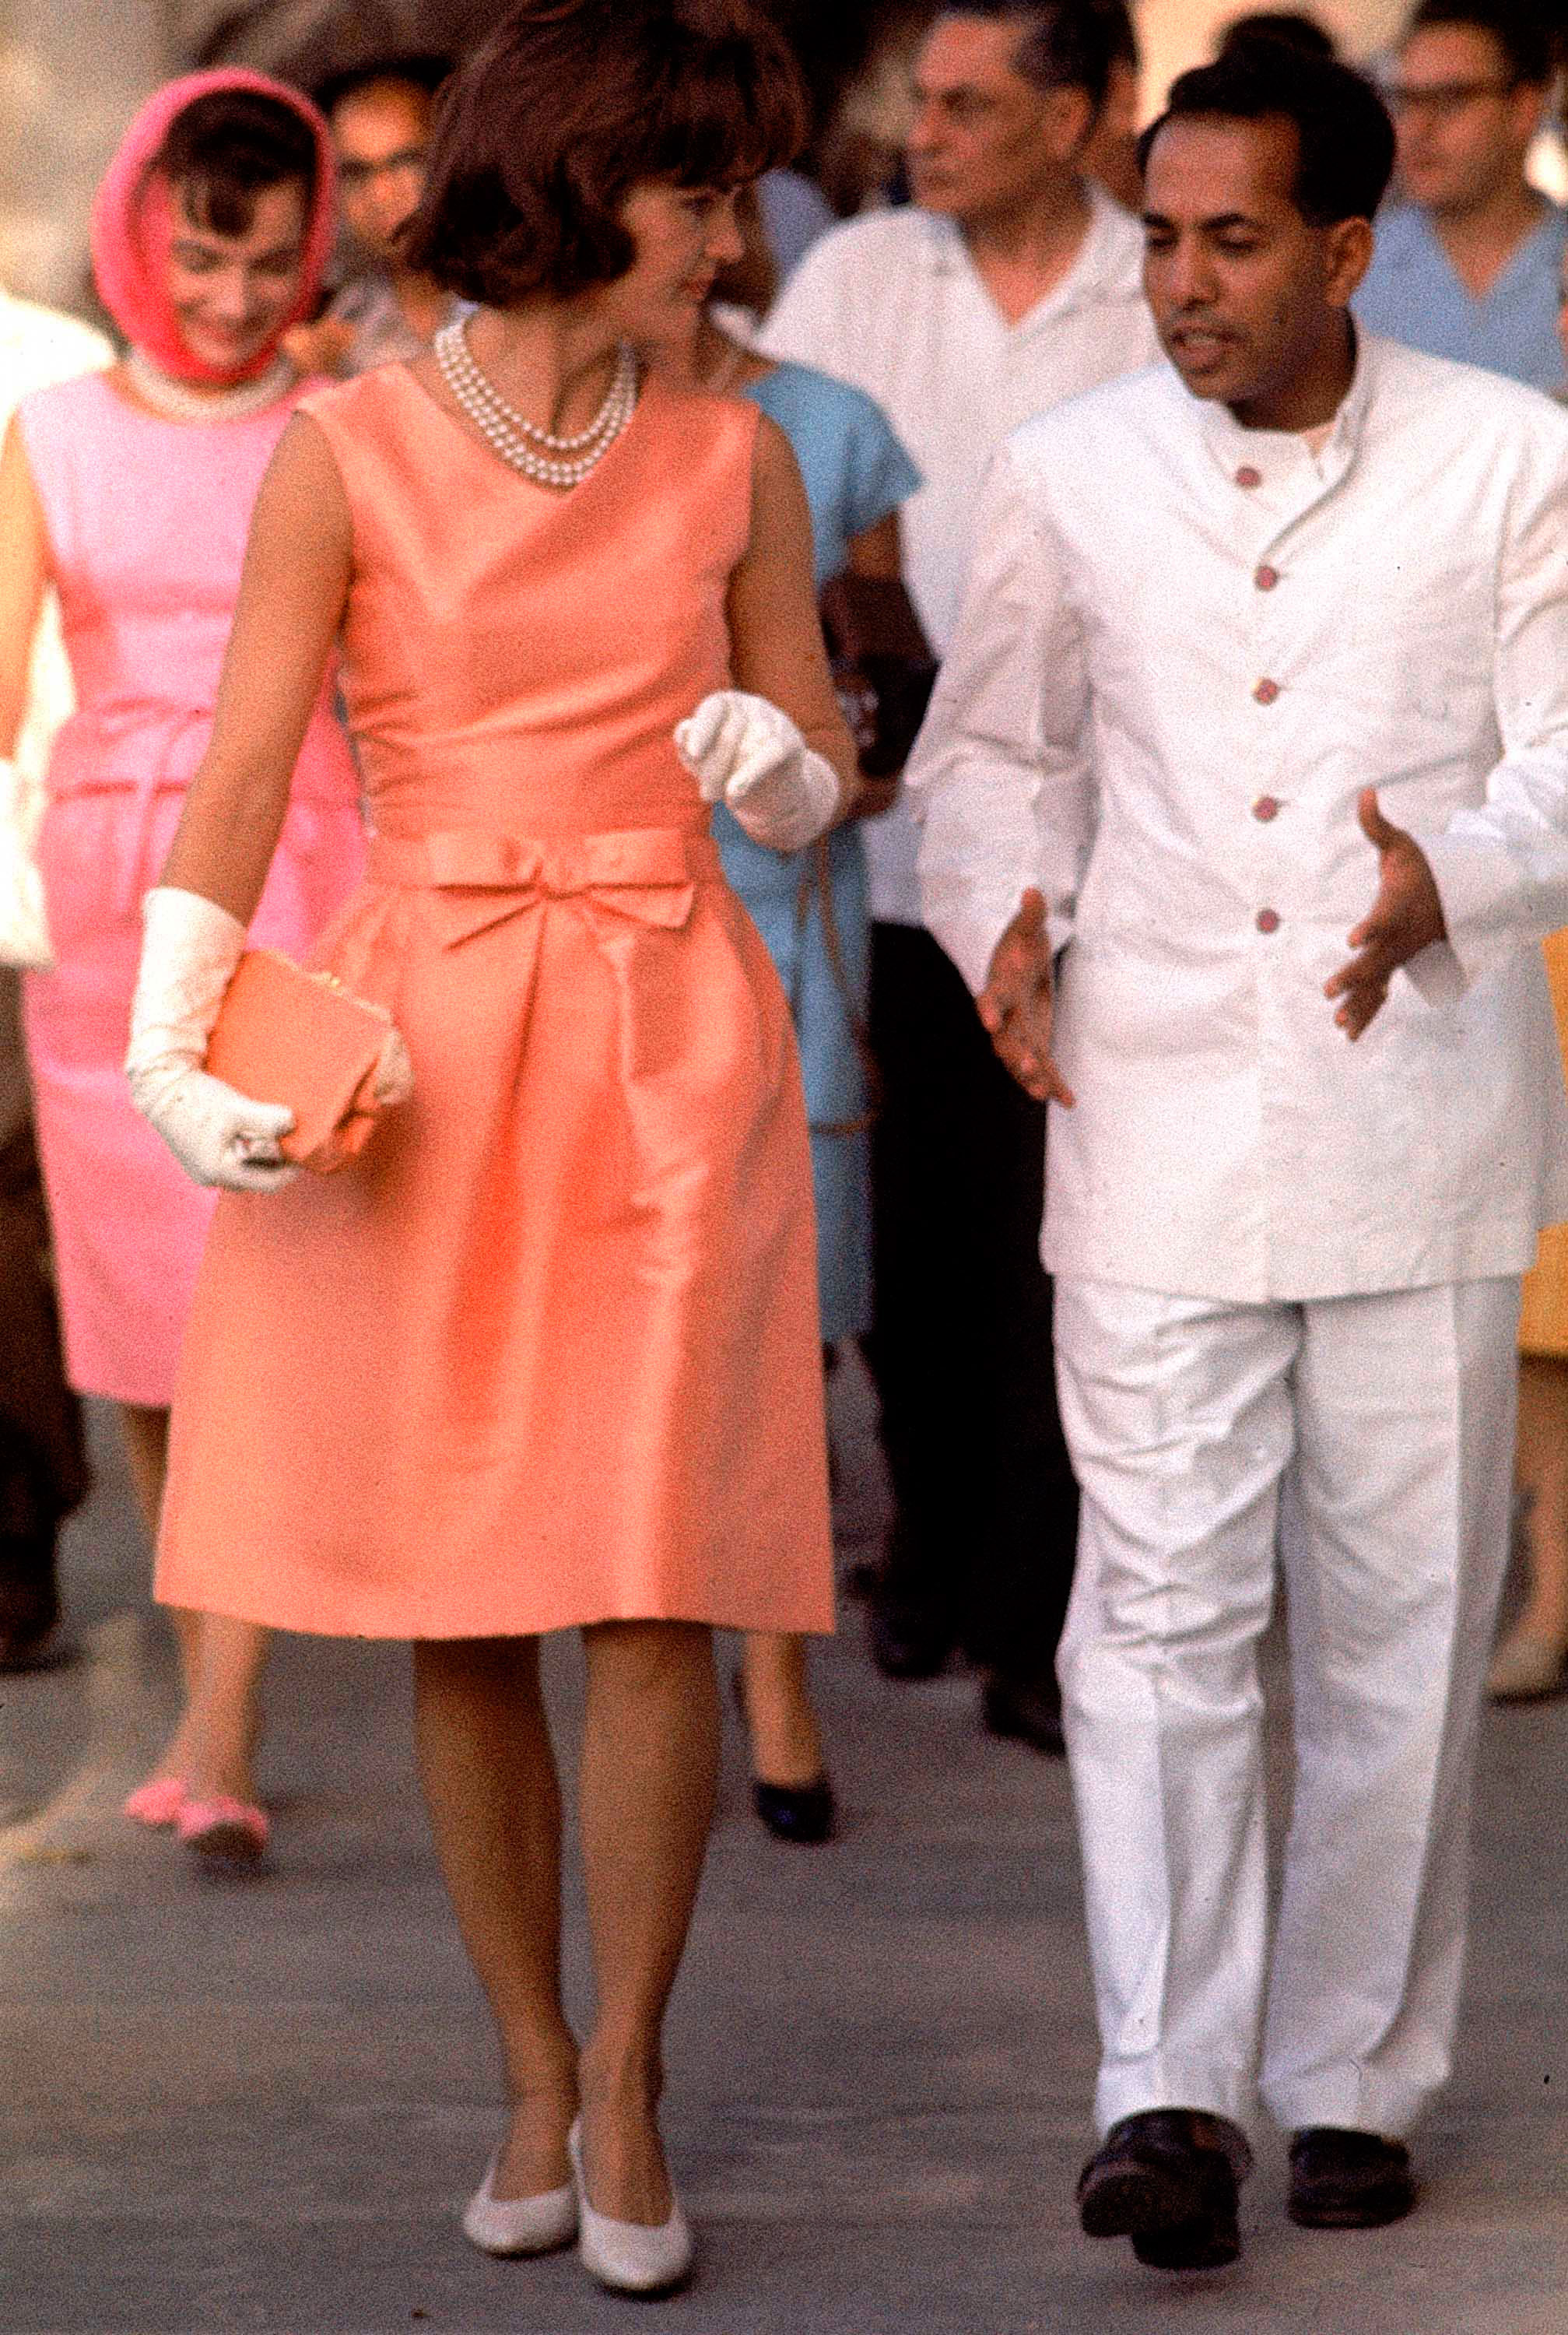 In fitted silk apricot dress, Jackie walks through crowds at Udaipur, where she was given a noisy reception." She walks with the Maharaj of Mewar, left, during her visit in 1962.